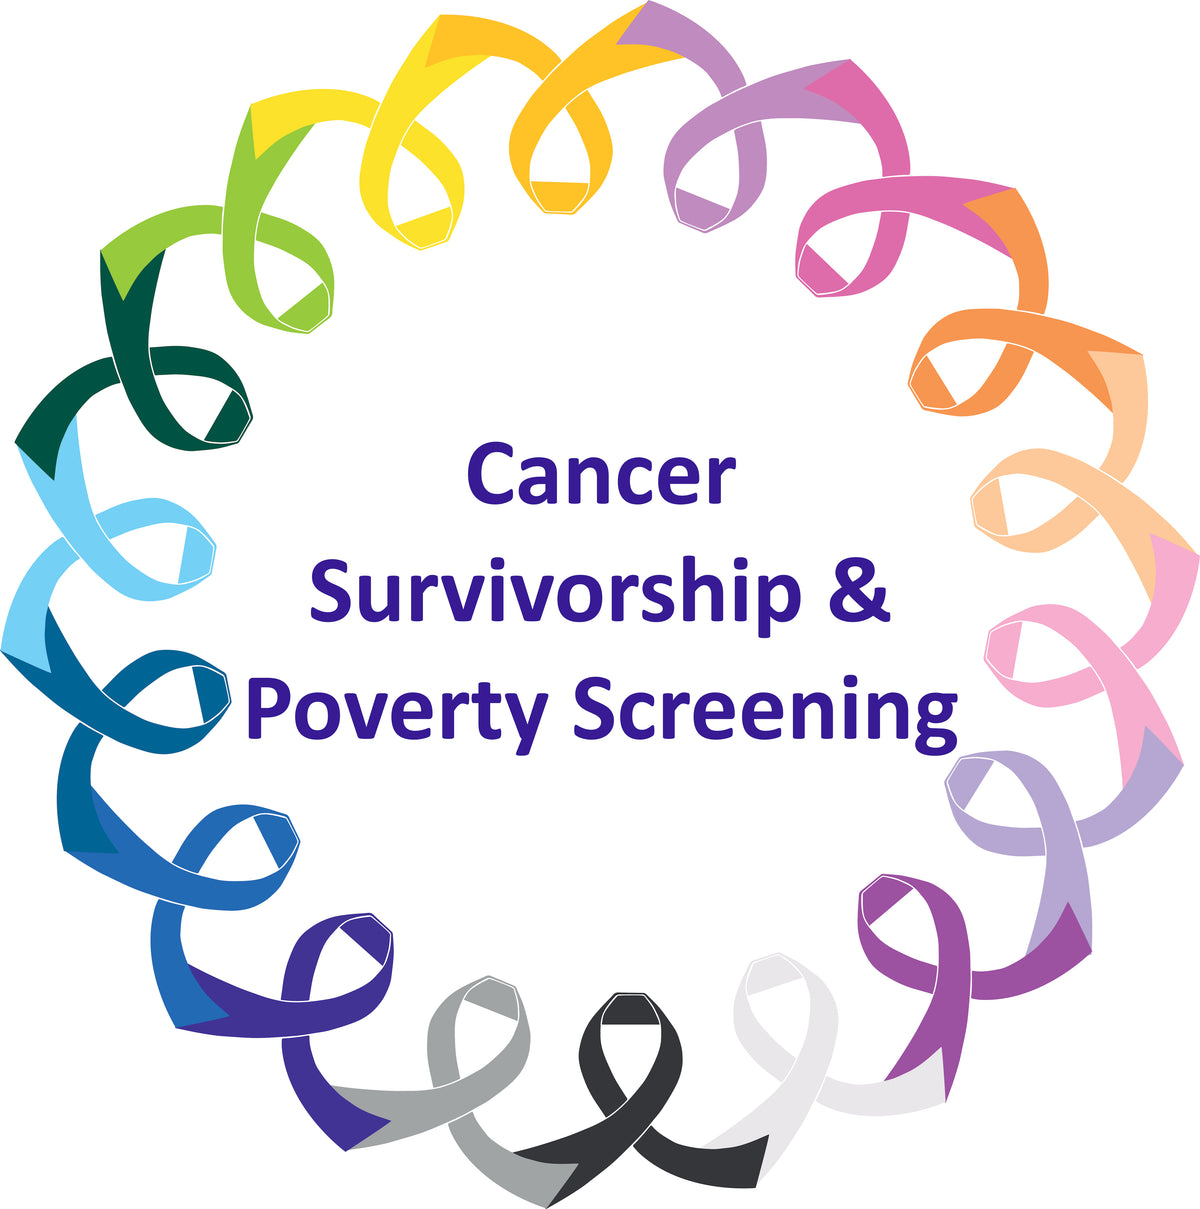 COMING DECEMBER 2023 | Cancer Survivorship & Poverty Screening for Interprofessional Healthcare Providers